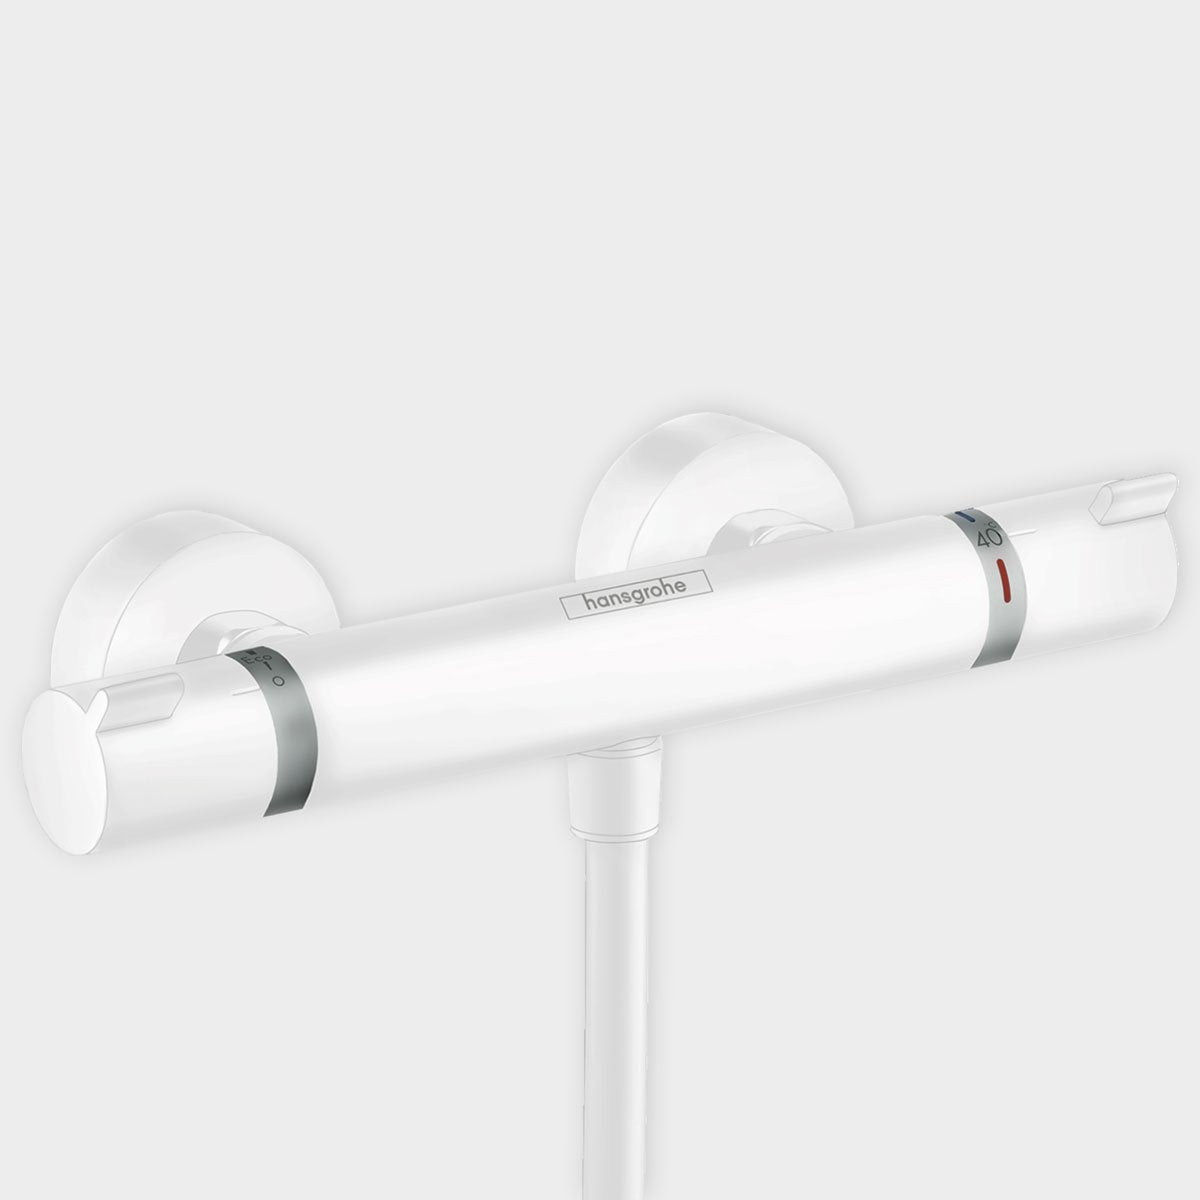 Hansgrohe Ecostat Exposed Thermostatic Valve Bar white